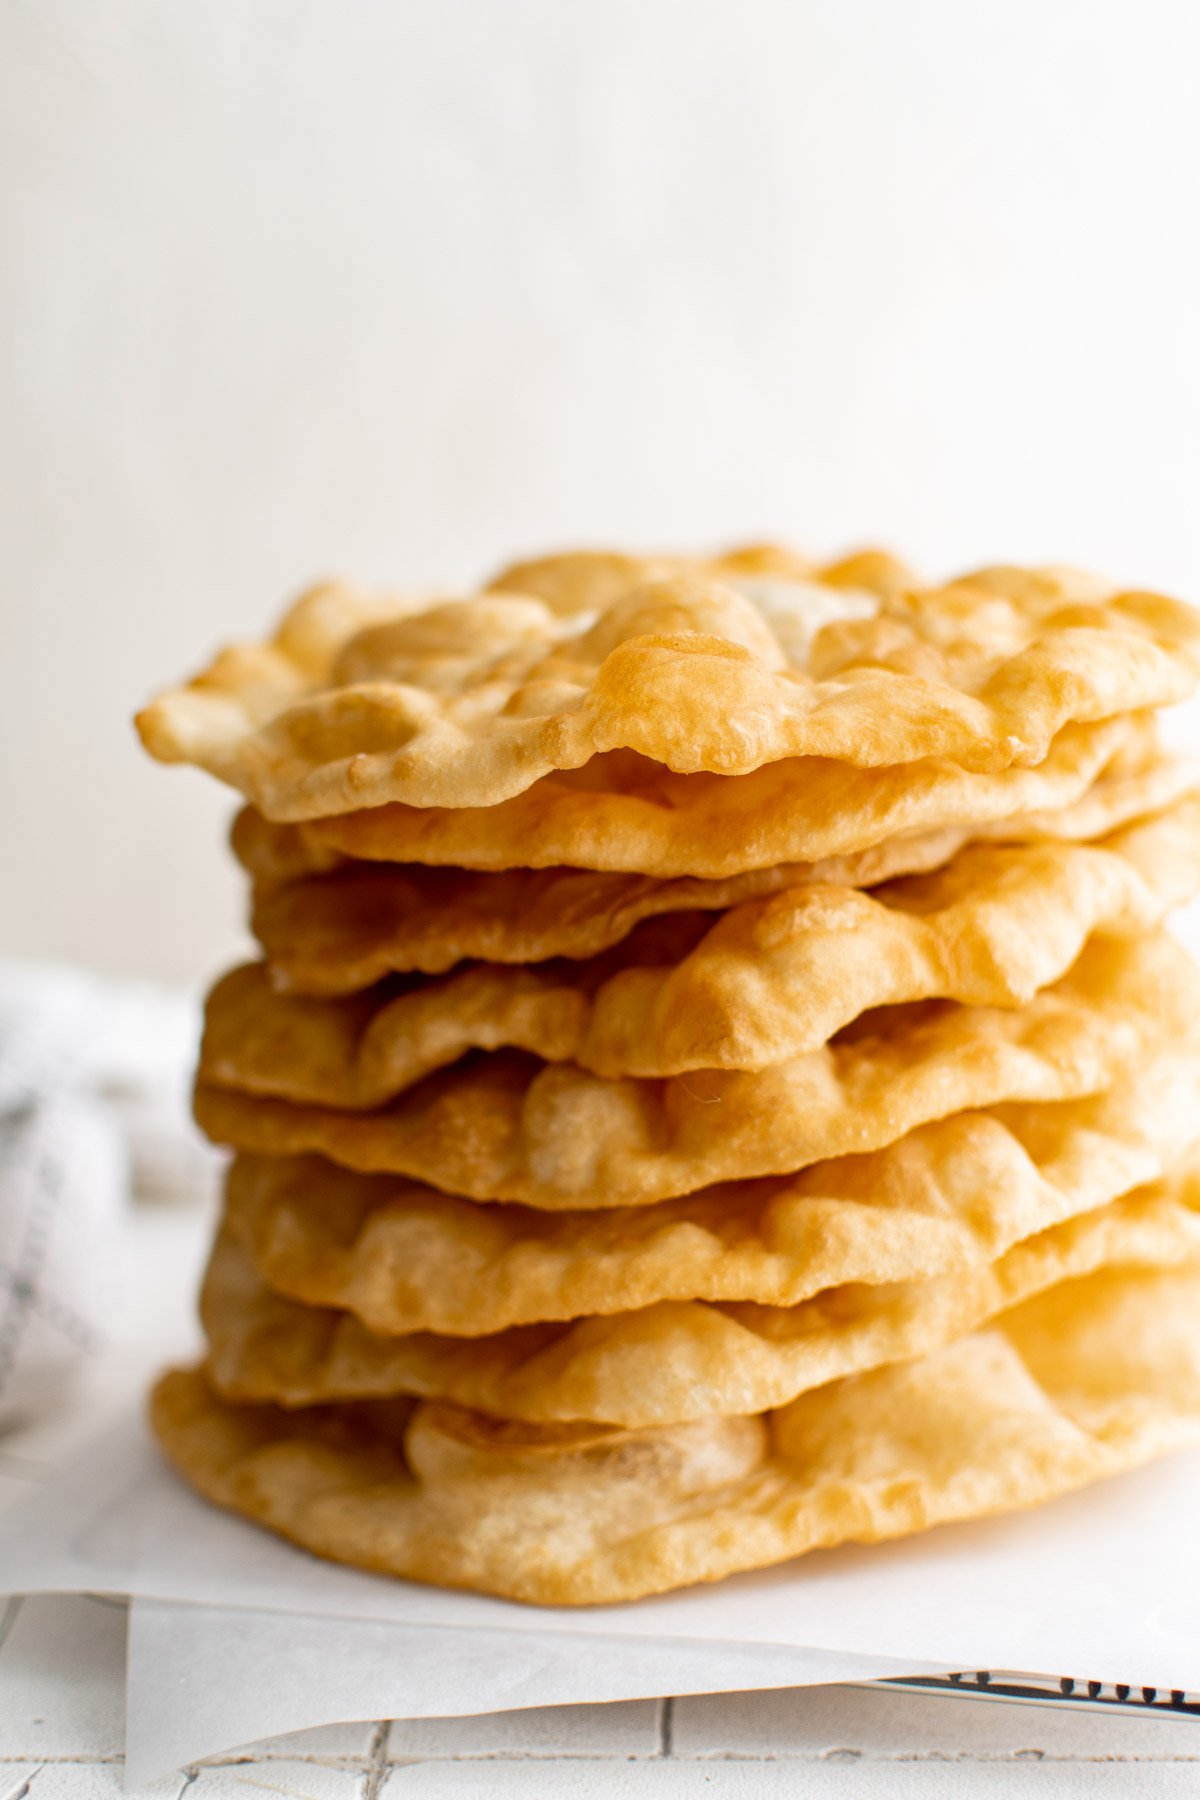 Stack of fry bread pieces.